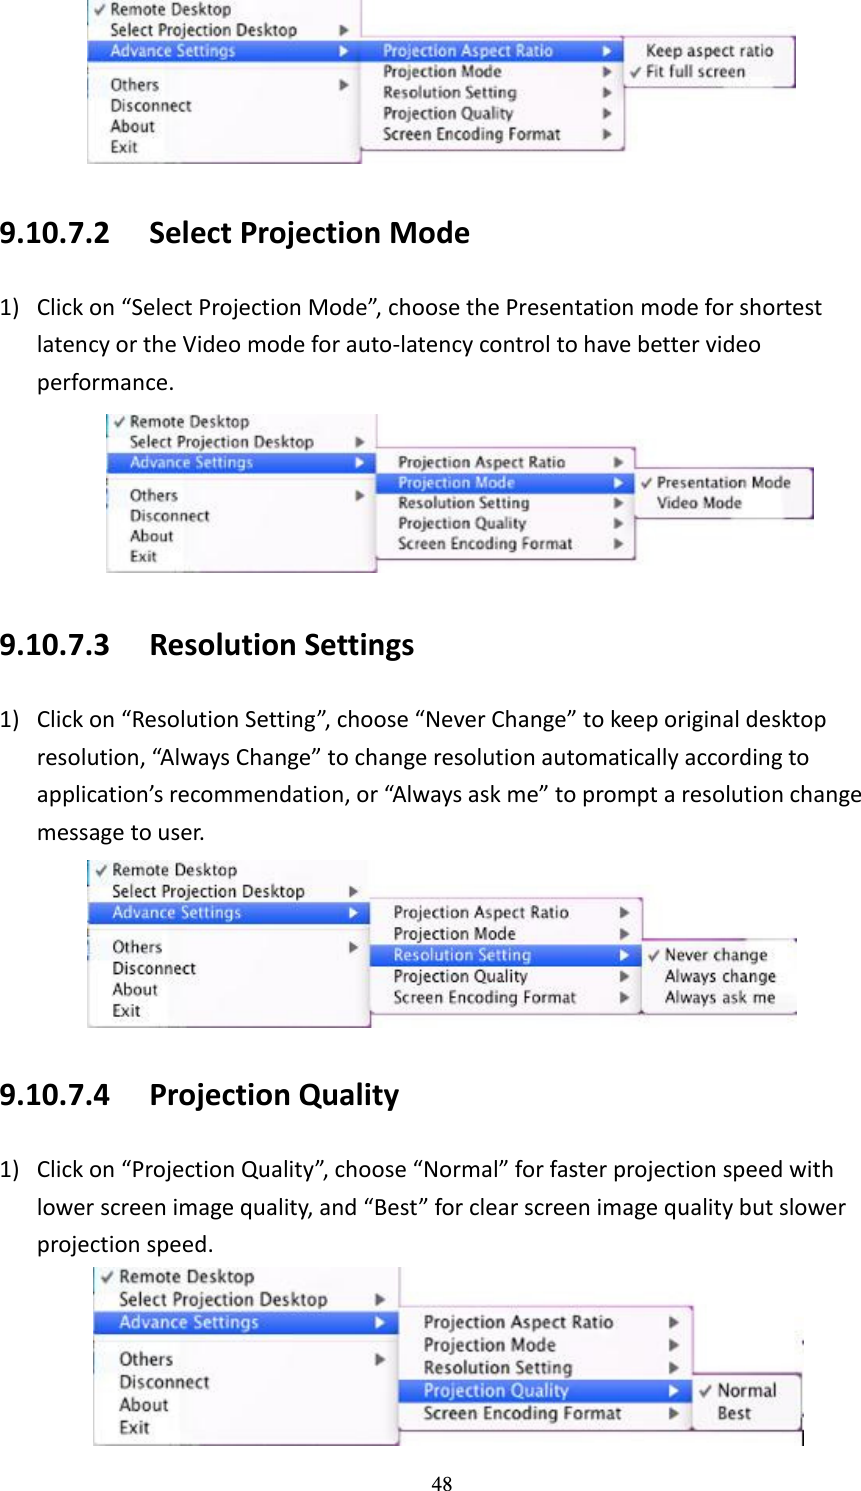   48  9.10.7.2 Select Projection Mode 1) Click on “Select Projection Mode”, choose the Presentation mode for shortest latency or the Video mode for auto-latency control to have better video performance.  9.10.7.3 Resolution Settings 1) Click on “Resolution Setting”, choose “Never Change” to keep original desktop resolution, “Always Change” to change resolution automatically according to application’s recommendation, or “Always ask me” to prompt a resolution change message to user.    9.10.7.4 Projection Quality 1) Click on “Projection Quality”, choose “Normal” for faster projection speed with lower screen image quality, and “Best” for clear screen image quality but slower projection speed.    